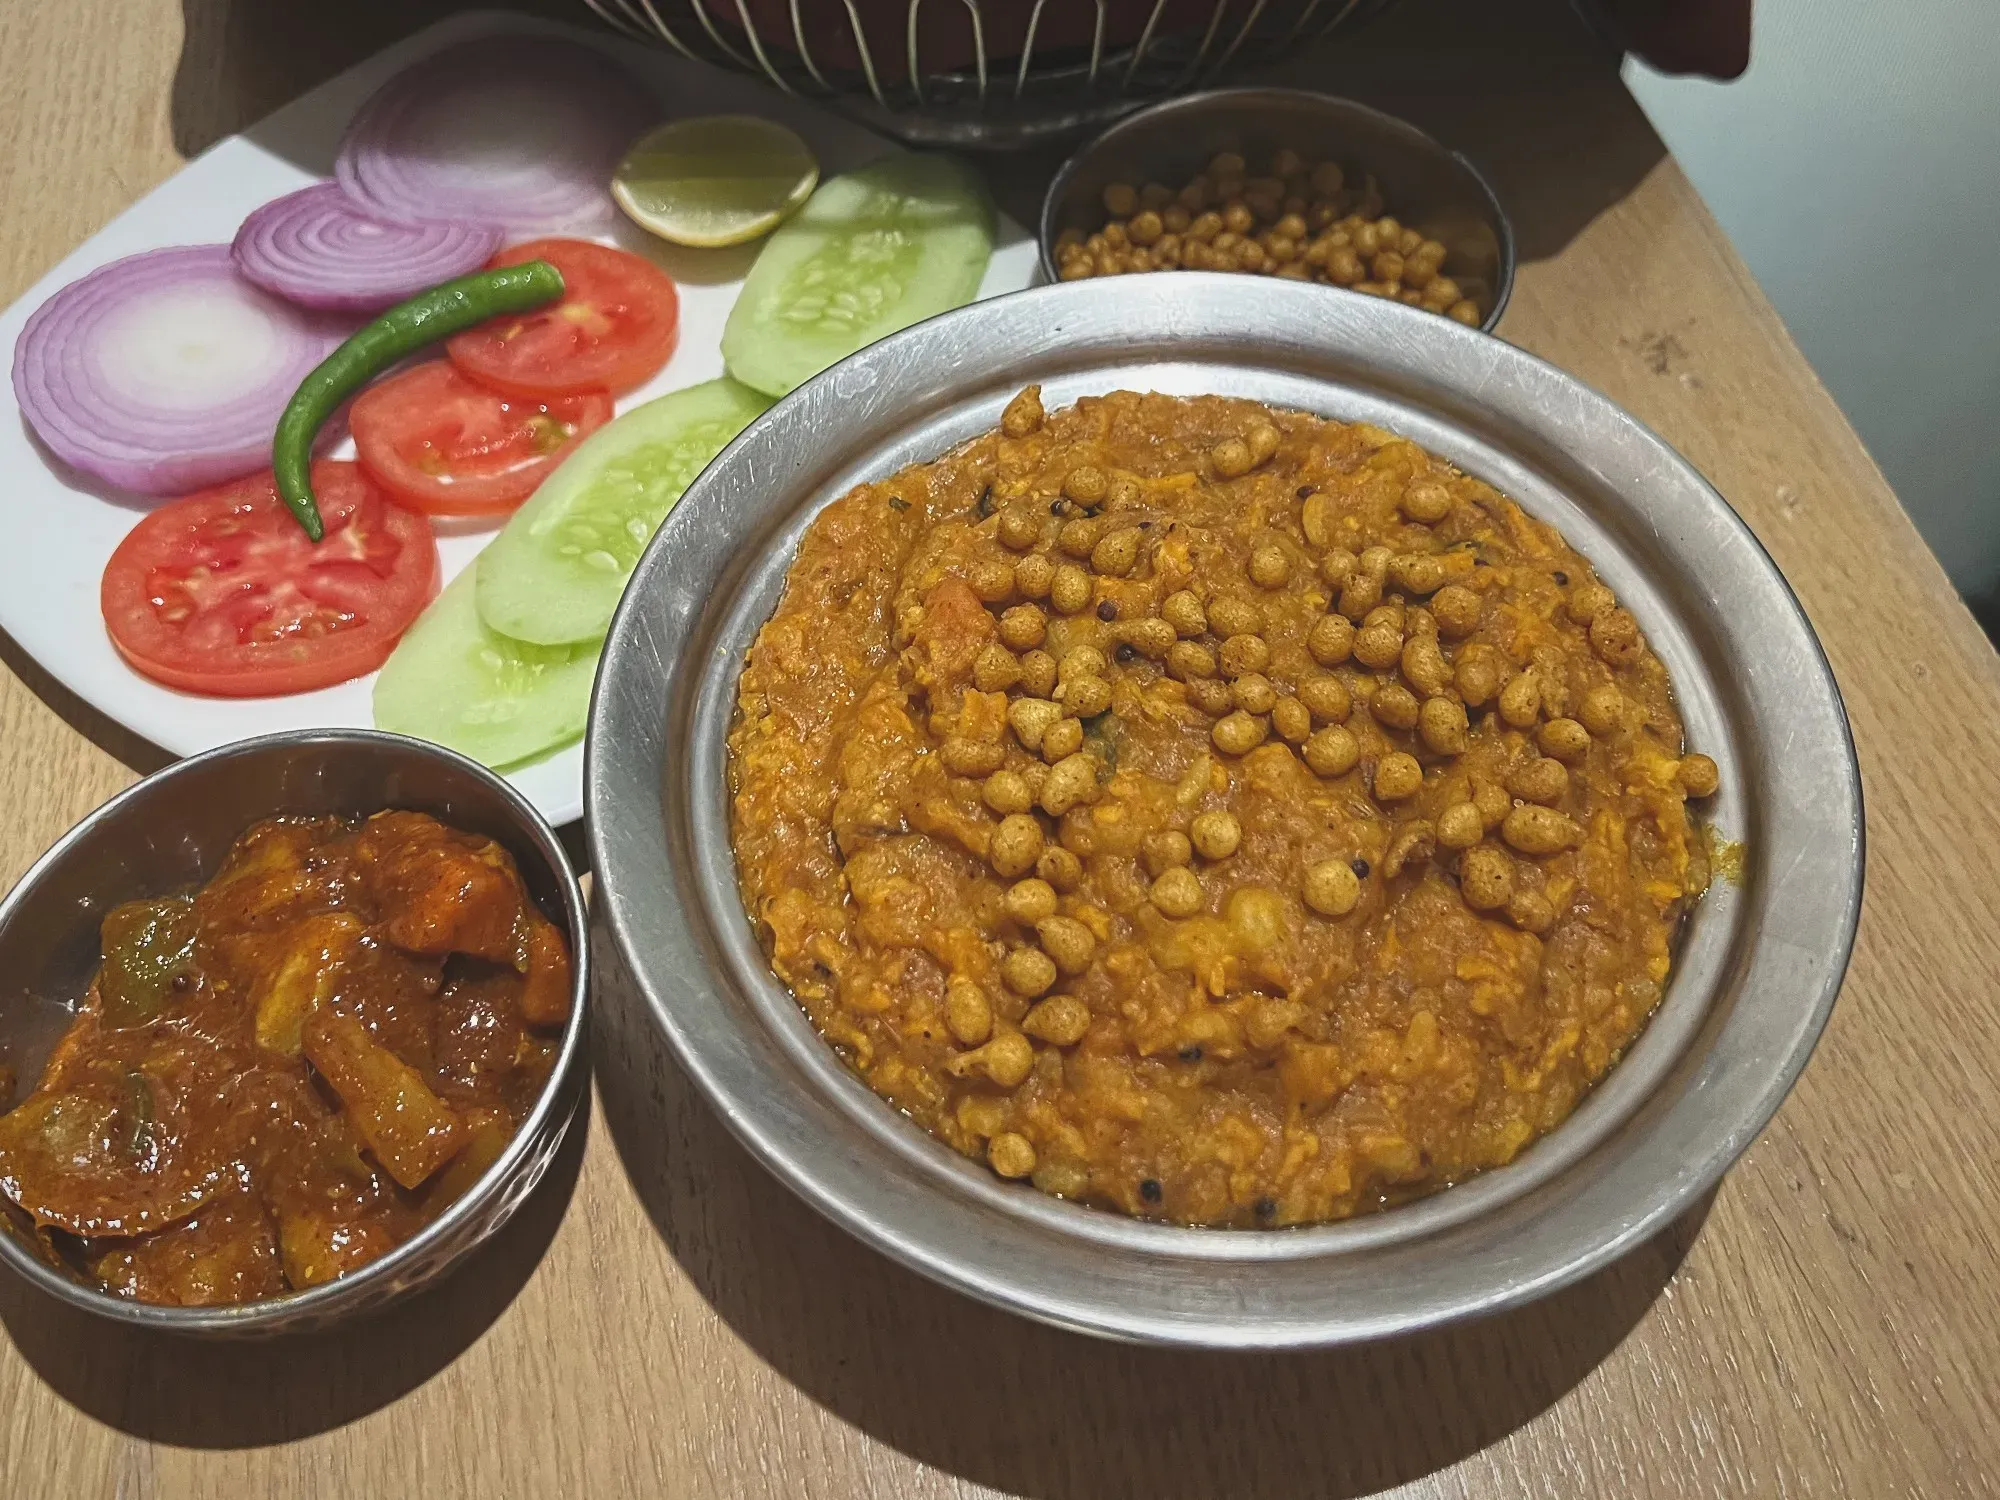 Angled shot of a bowl of bisi bele bath with sides of fermented and fresh vegetables.